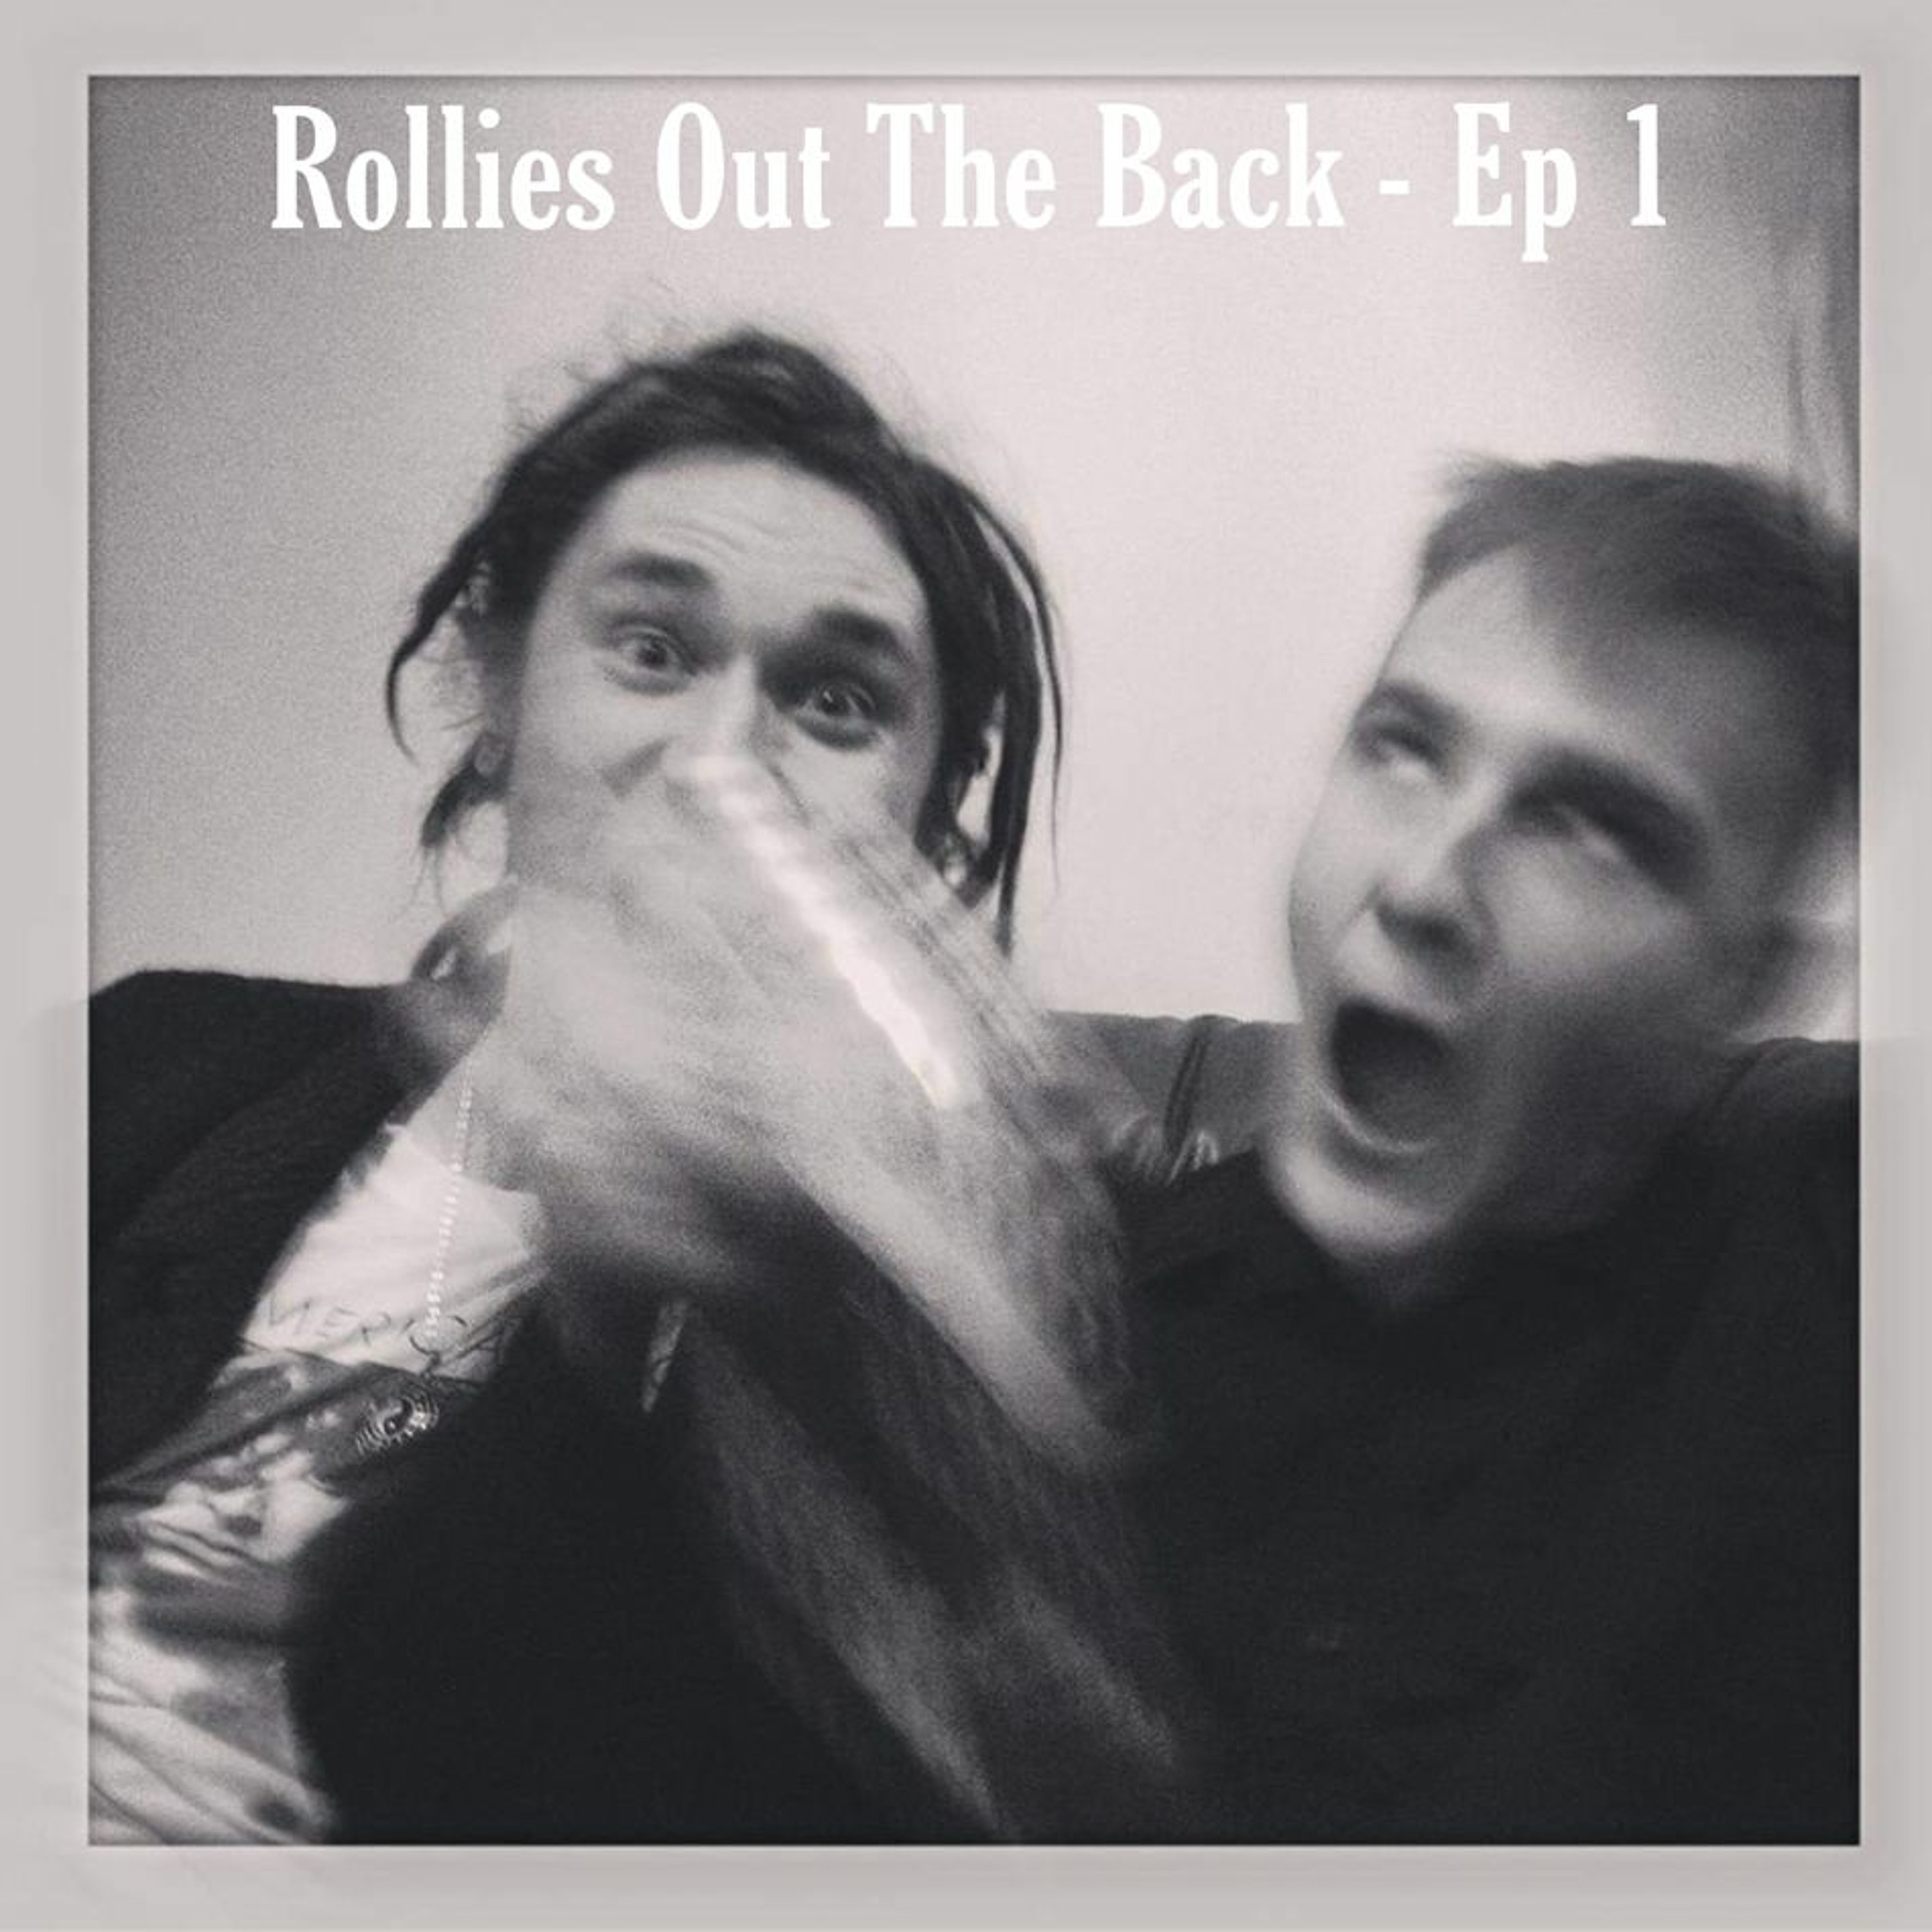 Rollies Out The Back - Ep 1 (Feat. Lewe)